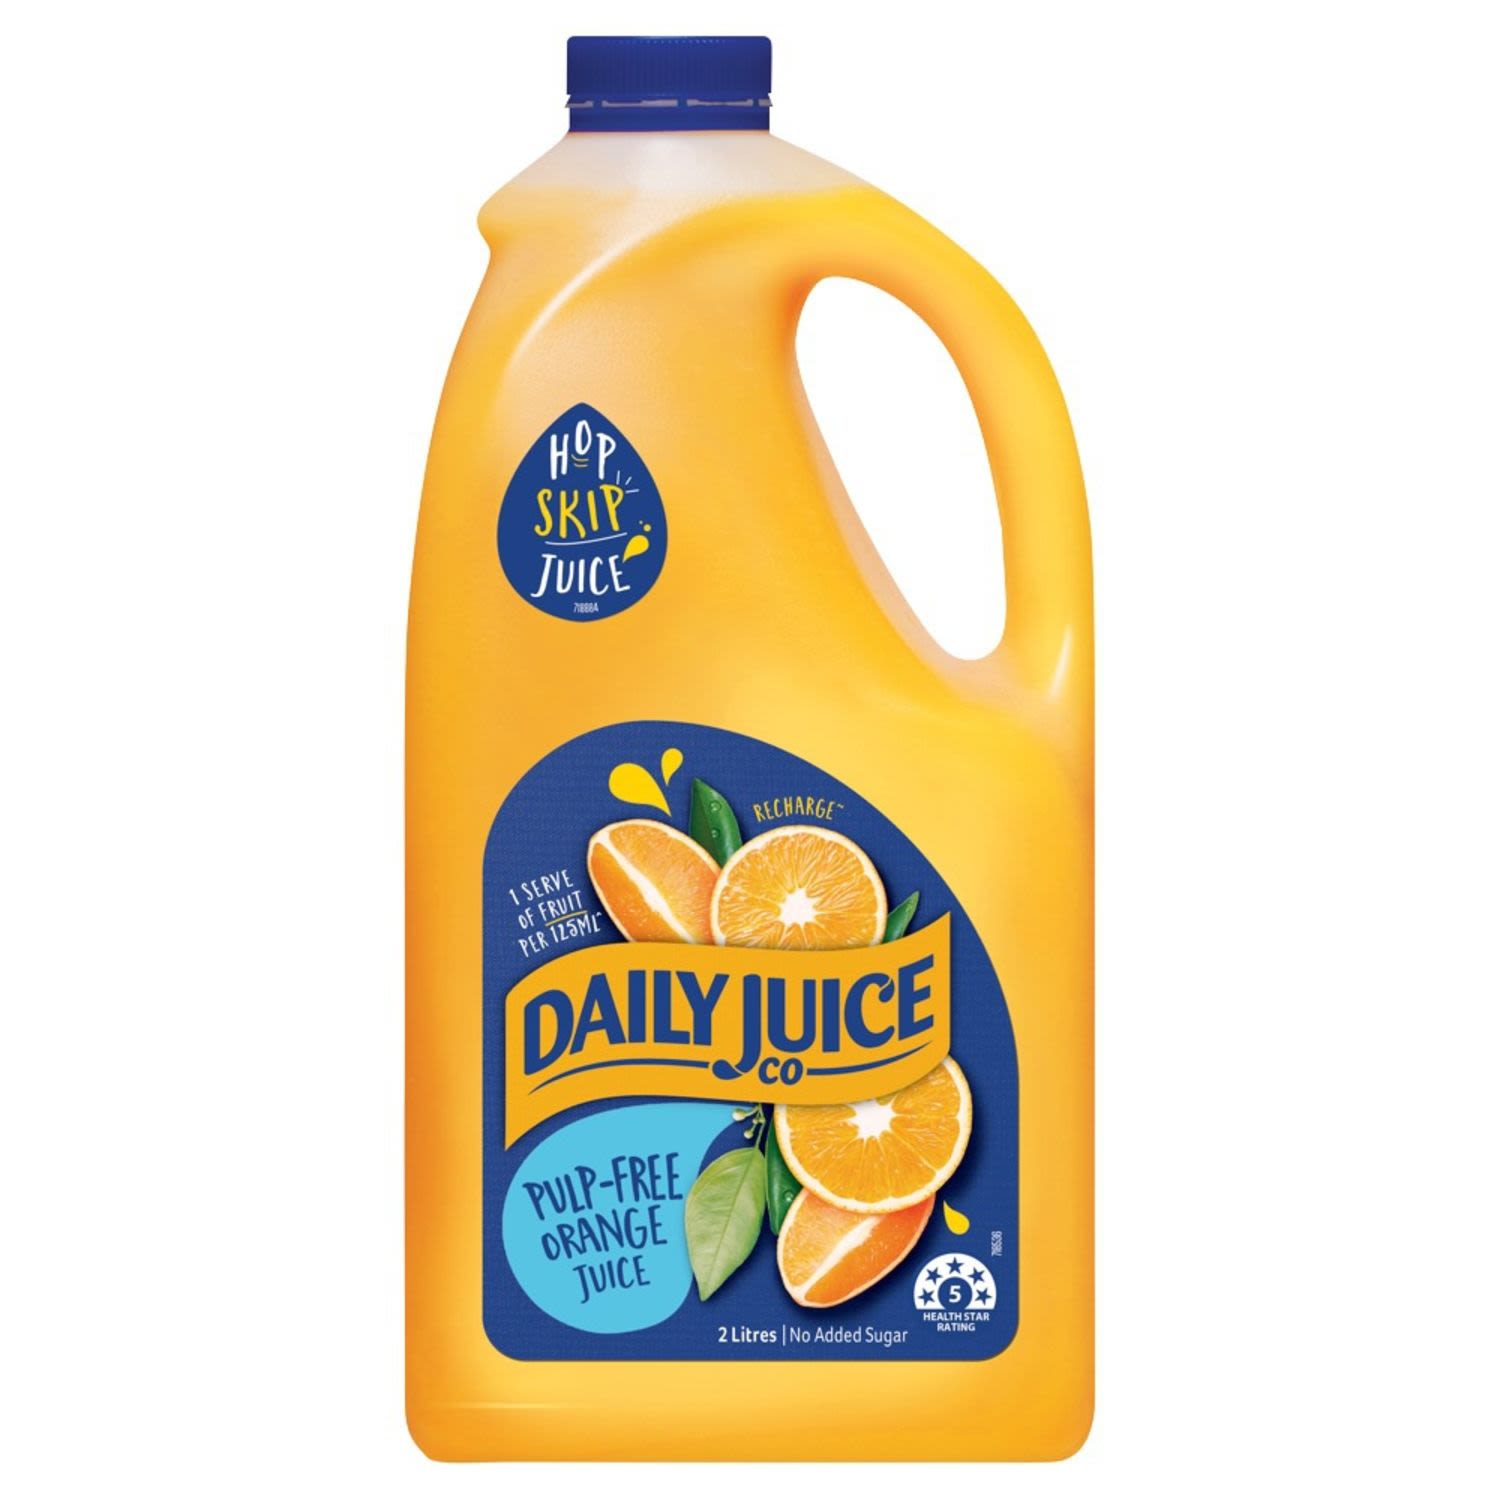 Daily Juice Orange is your daily dose of happiness! It is a delicious pulp free juice that’s perfect accompany your breakfast or refuel and refresh you throughout the day! Its packed with the good stuff to kick start your day with Vitamin C. It contains the goodness of fruit with one serve of fruit in 125mL of juice.<br /> <br />